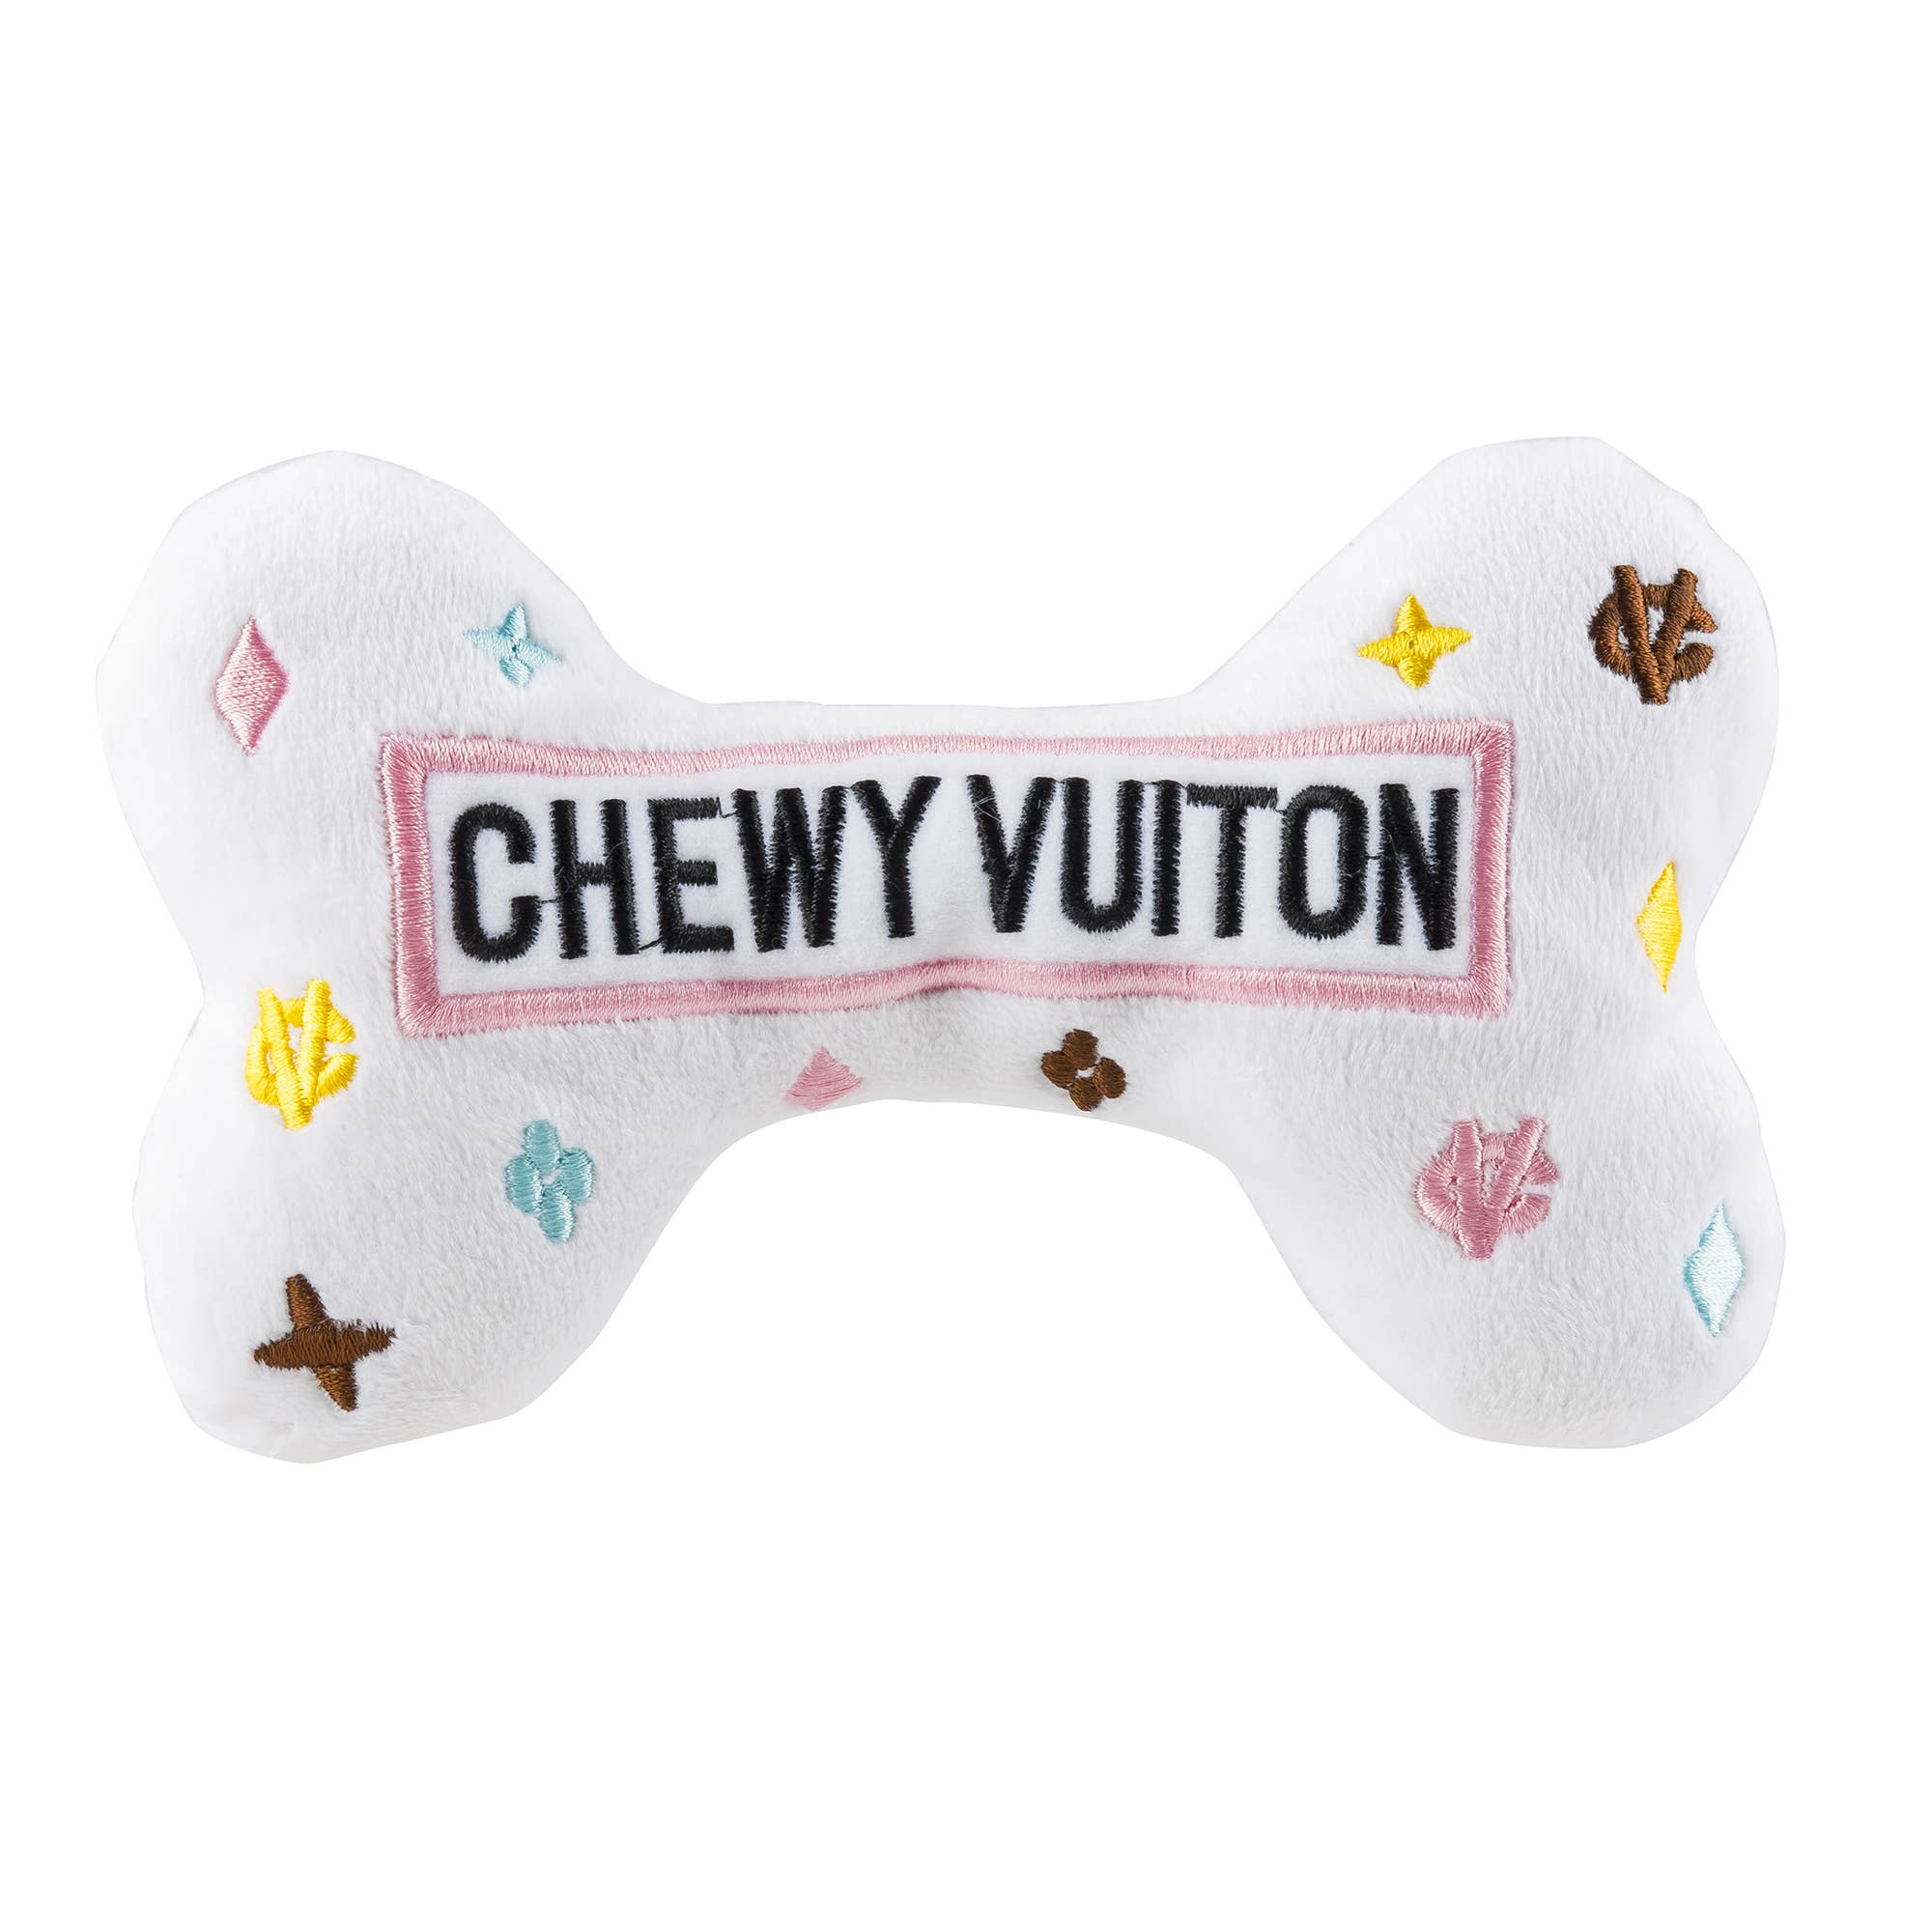 White Chewy Vuiton Bones Squeaker Dog Toy: Large